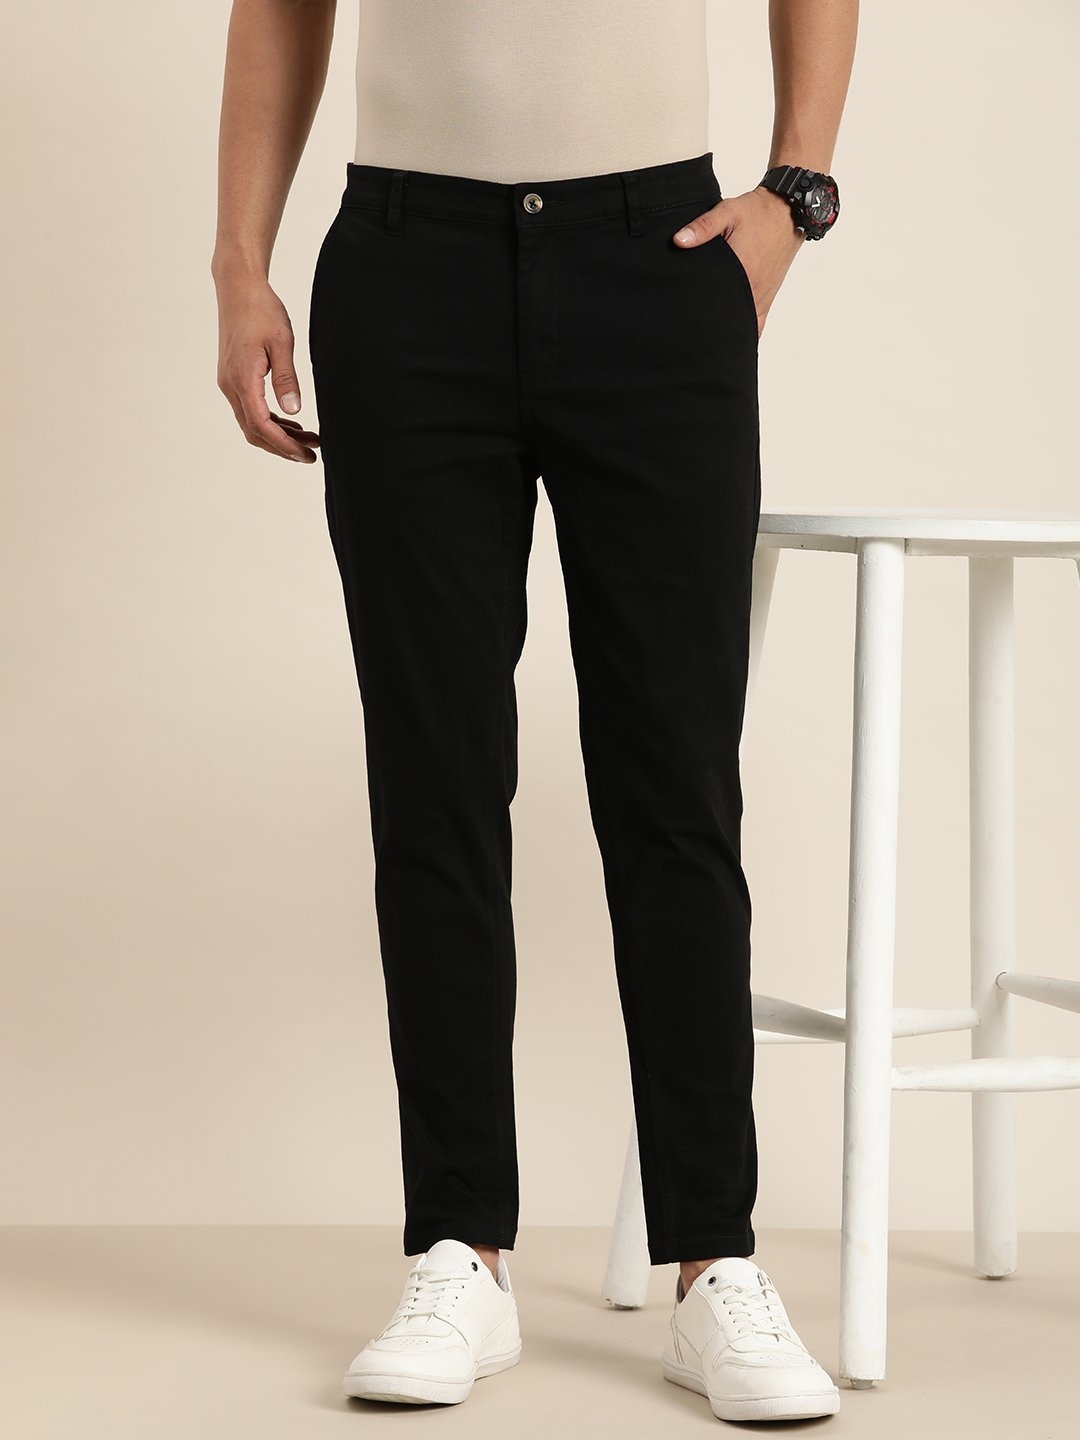 Difference of Opinion Black Solid Angle Length Trouser